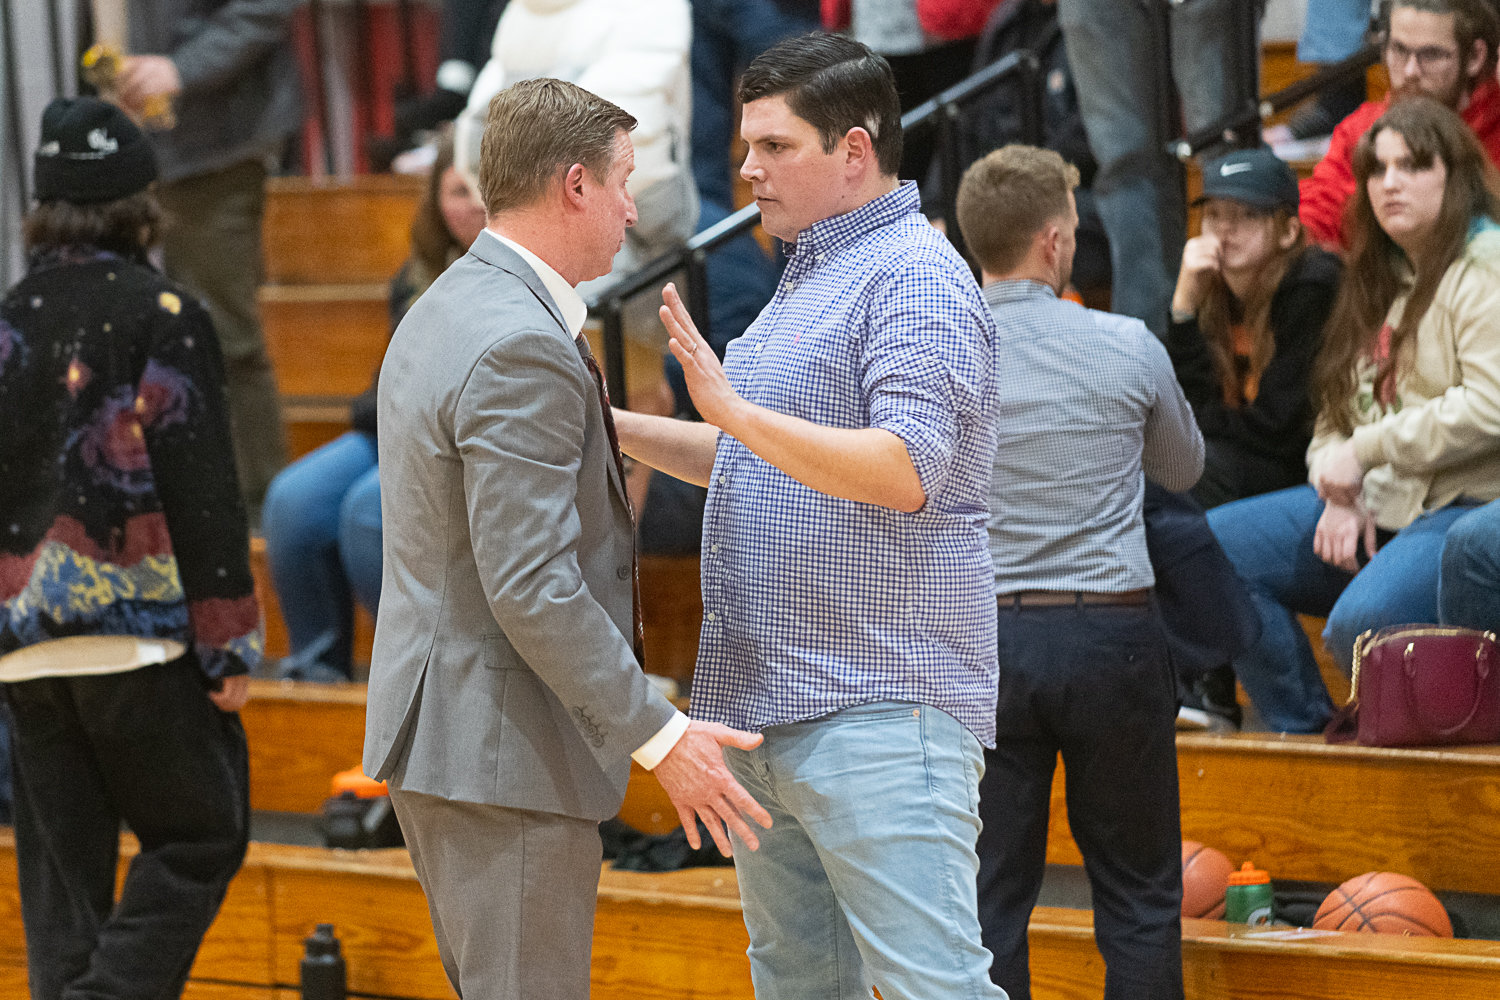 Tenino coach Ryan Robertson and Hoquiam coach Jeff Niemi talk things out after an animated end to the Grizzlies' 47-33 win over the Beavers at Brock Court on Jan. 24.